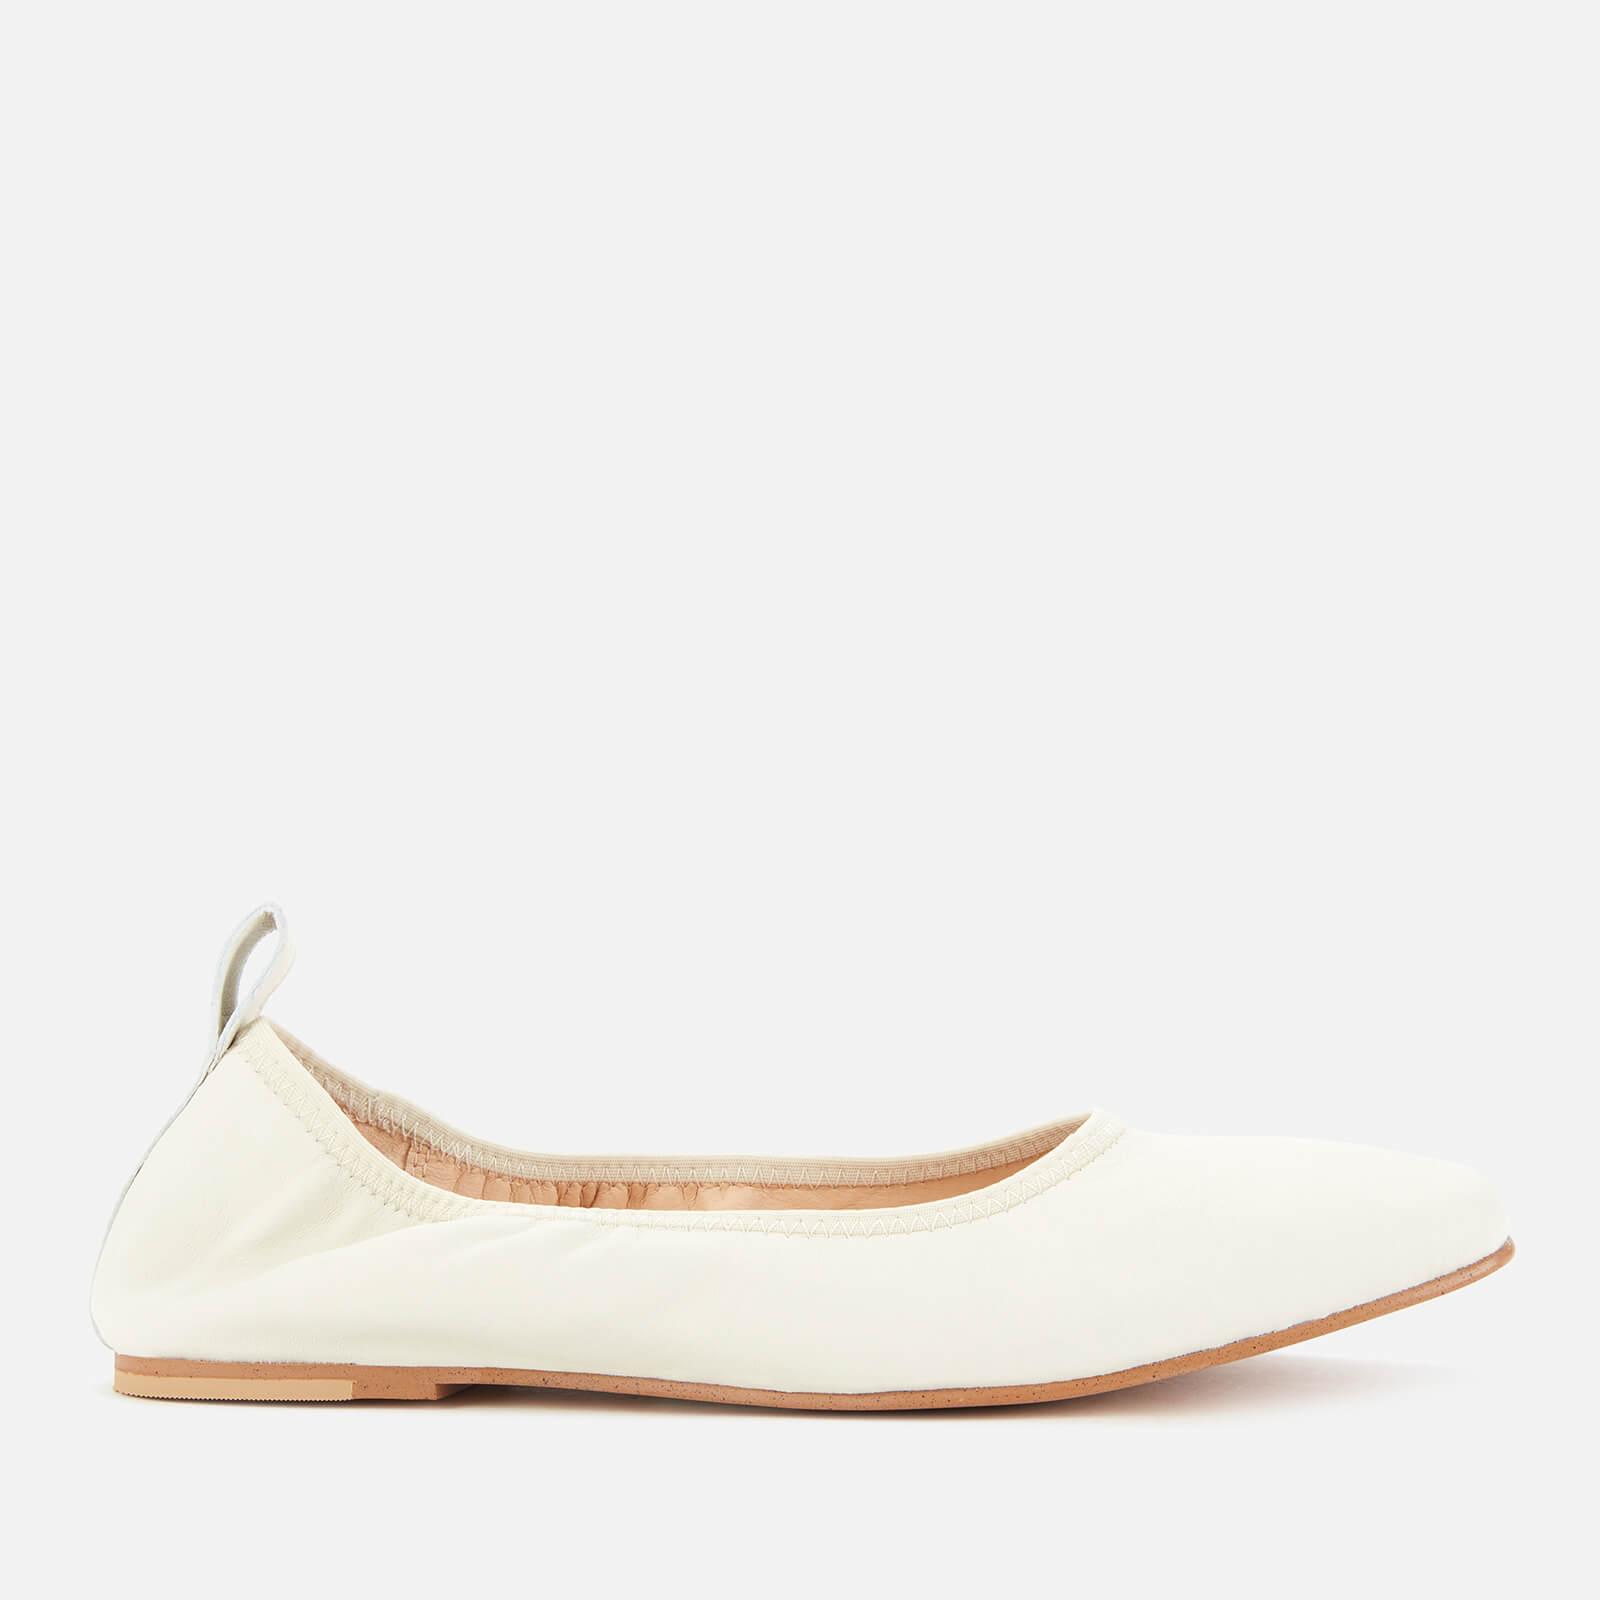 Clarks Pure Leather Ballet Flats in White | Lyst